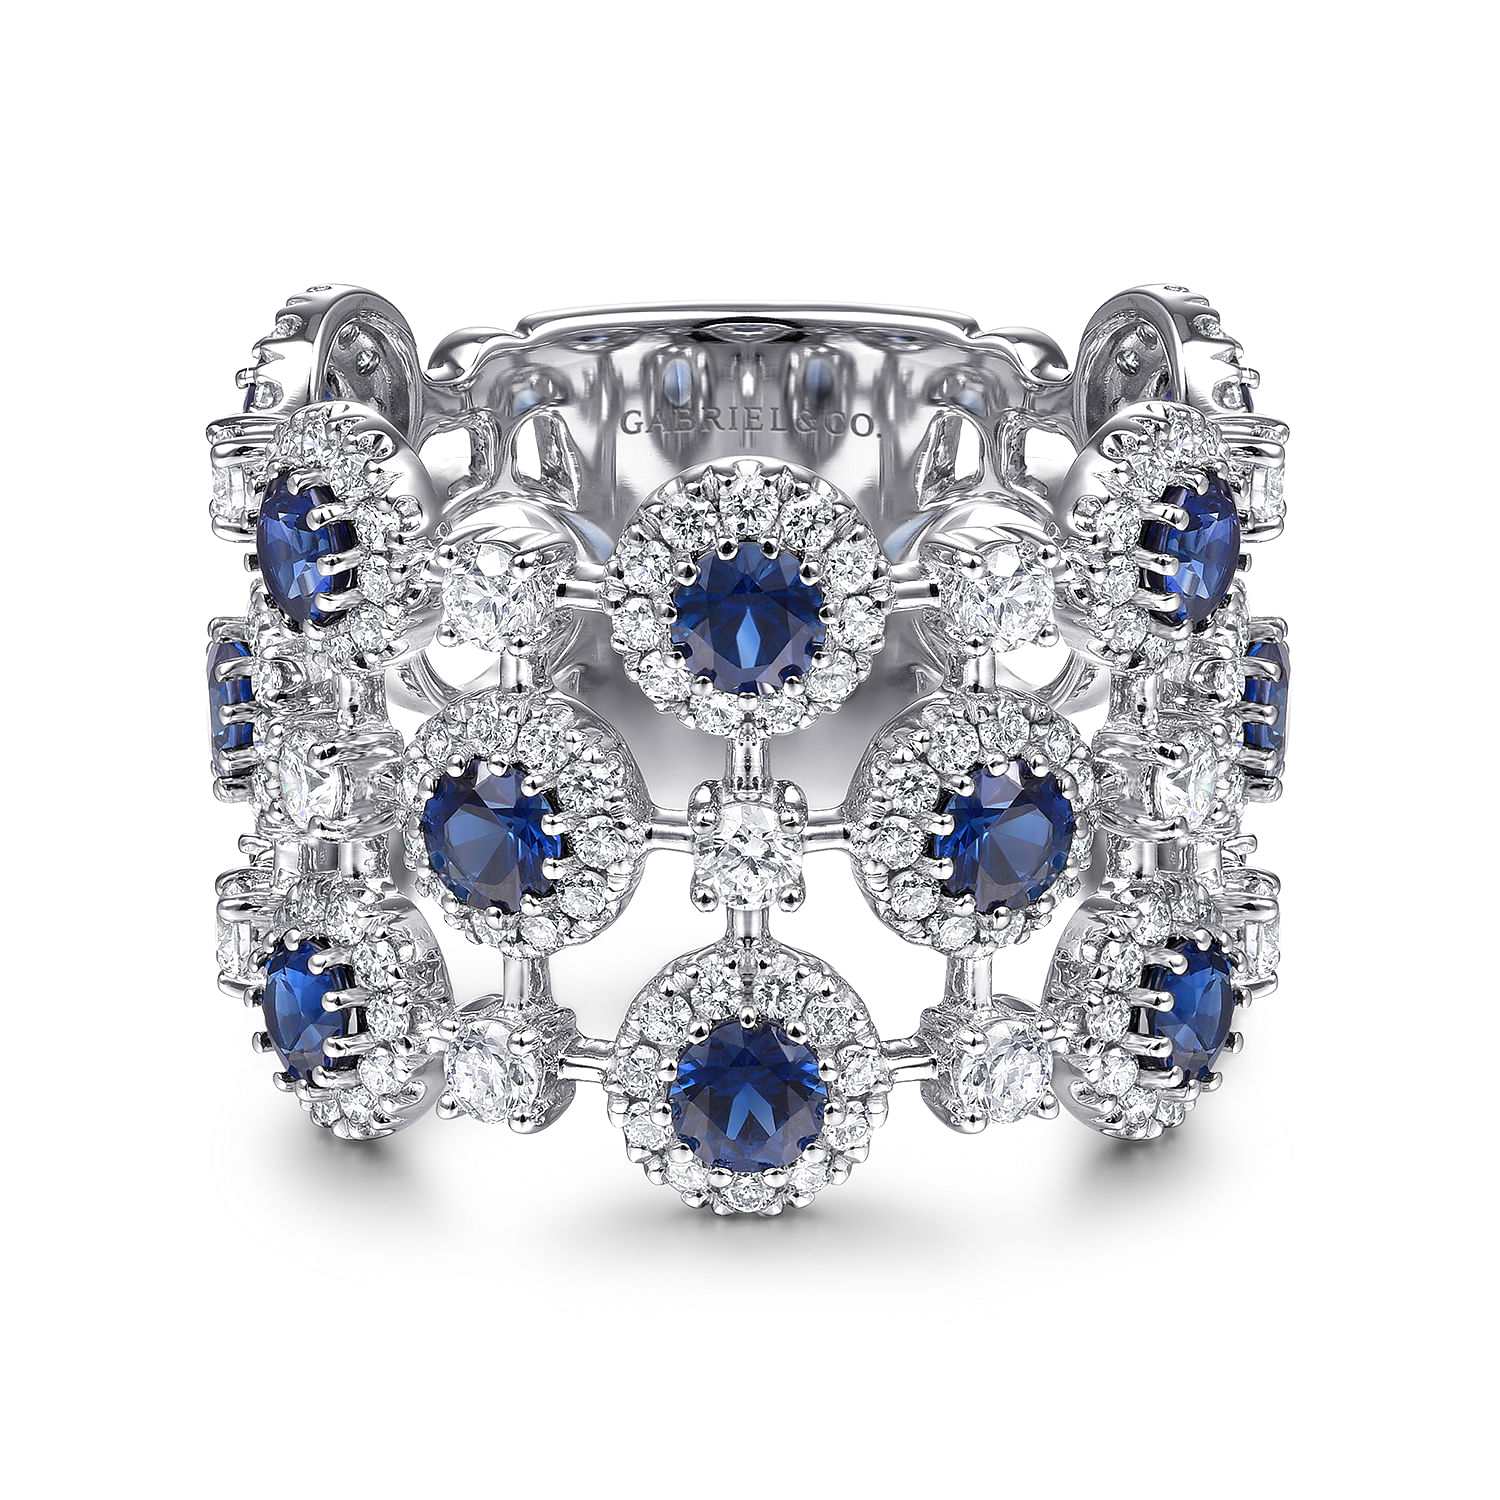 14K White Gold Wide Band Sapphire and Diamond Halo Ring